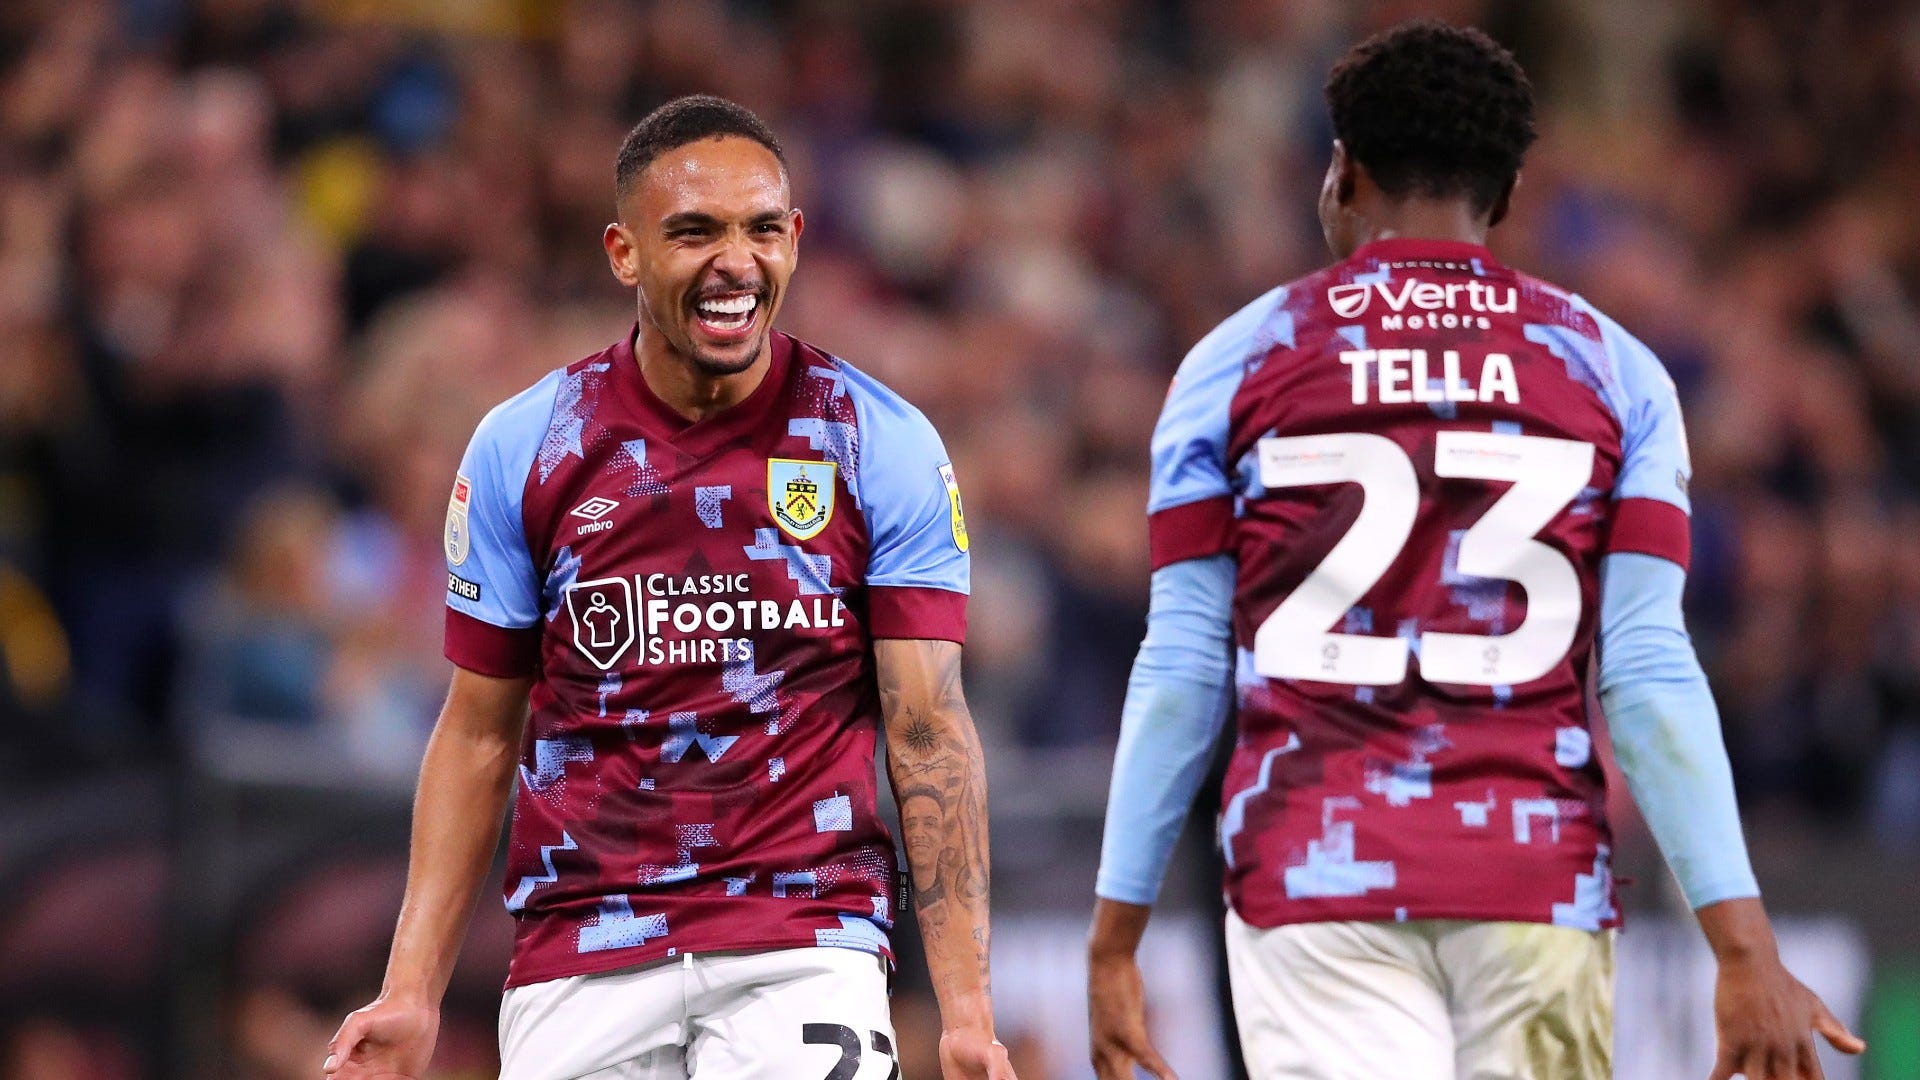 Burnley’s Tella and Cardiff City’s Ojo score, Troost-Ekong returns in Watford's Championship loss